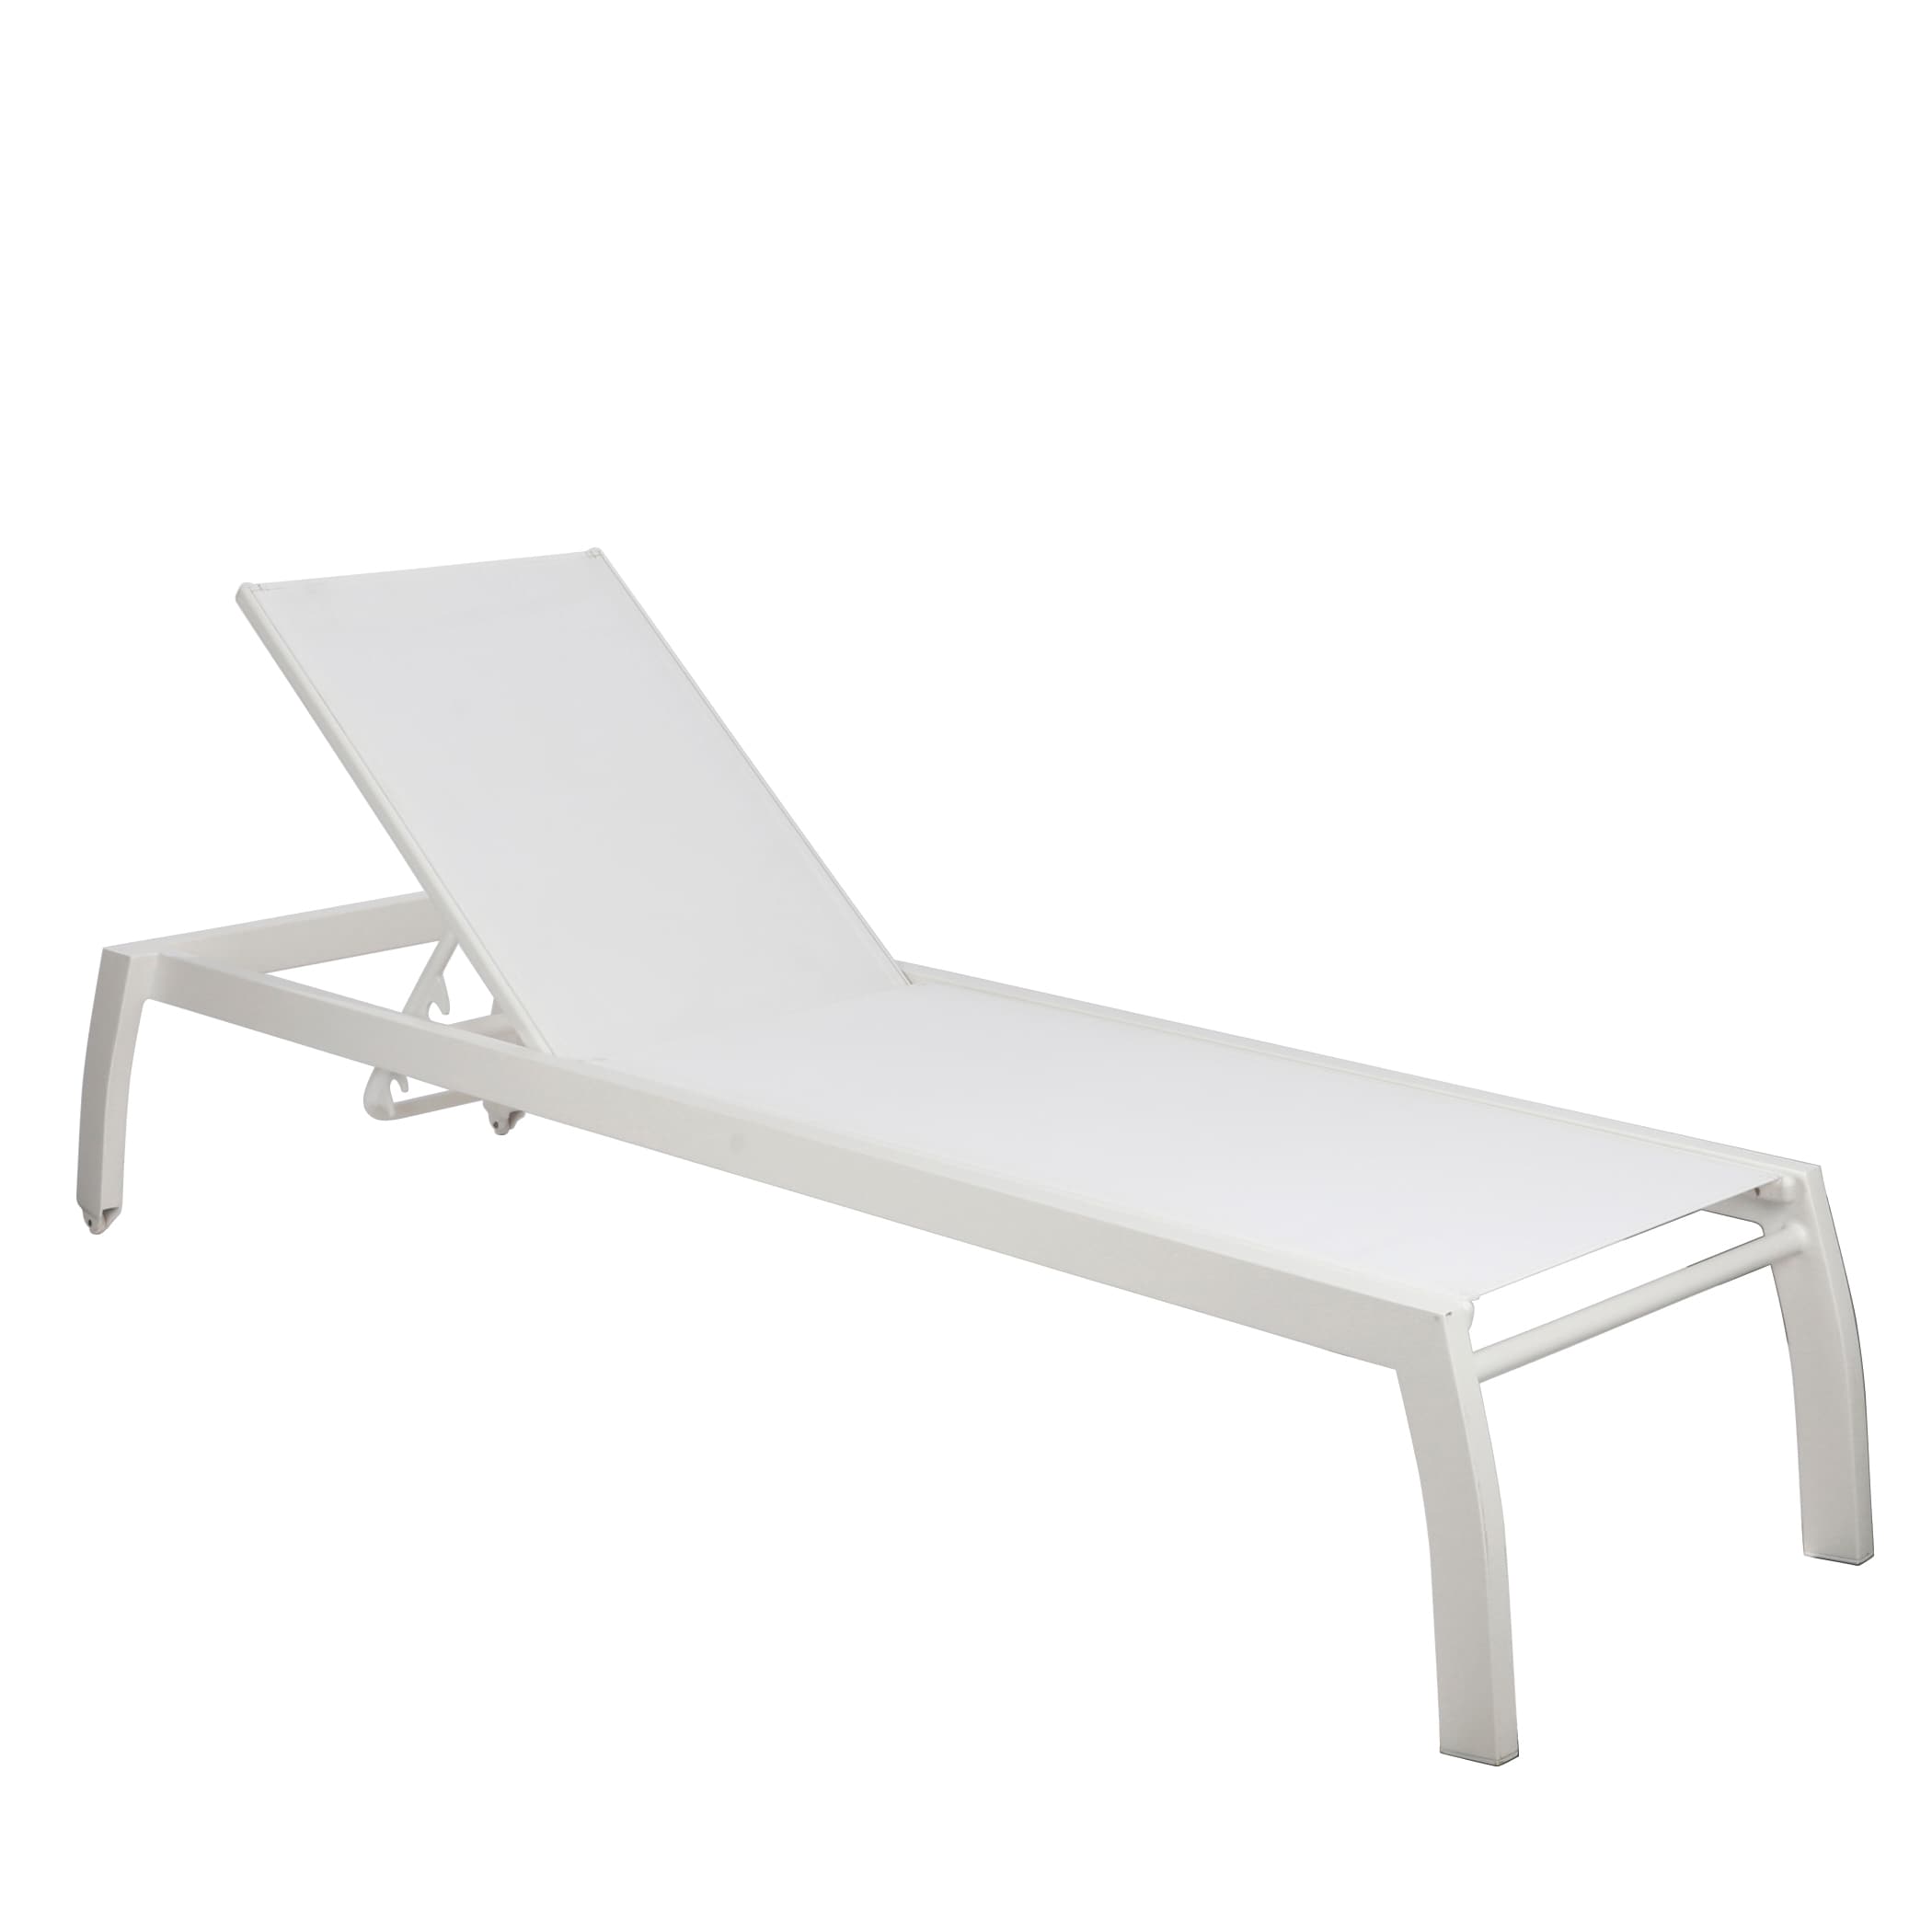 Origin 21 Slyvan Shores Stackable White Metal Frame Stationary Chaise  Lounge Chair(S) With White Sling Seat In The Patio Chairs Department At  Lowes.Com